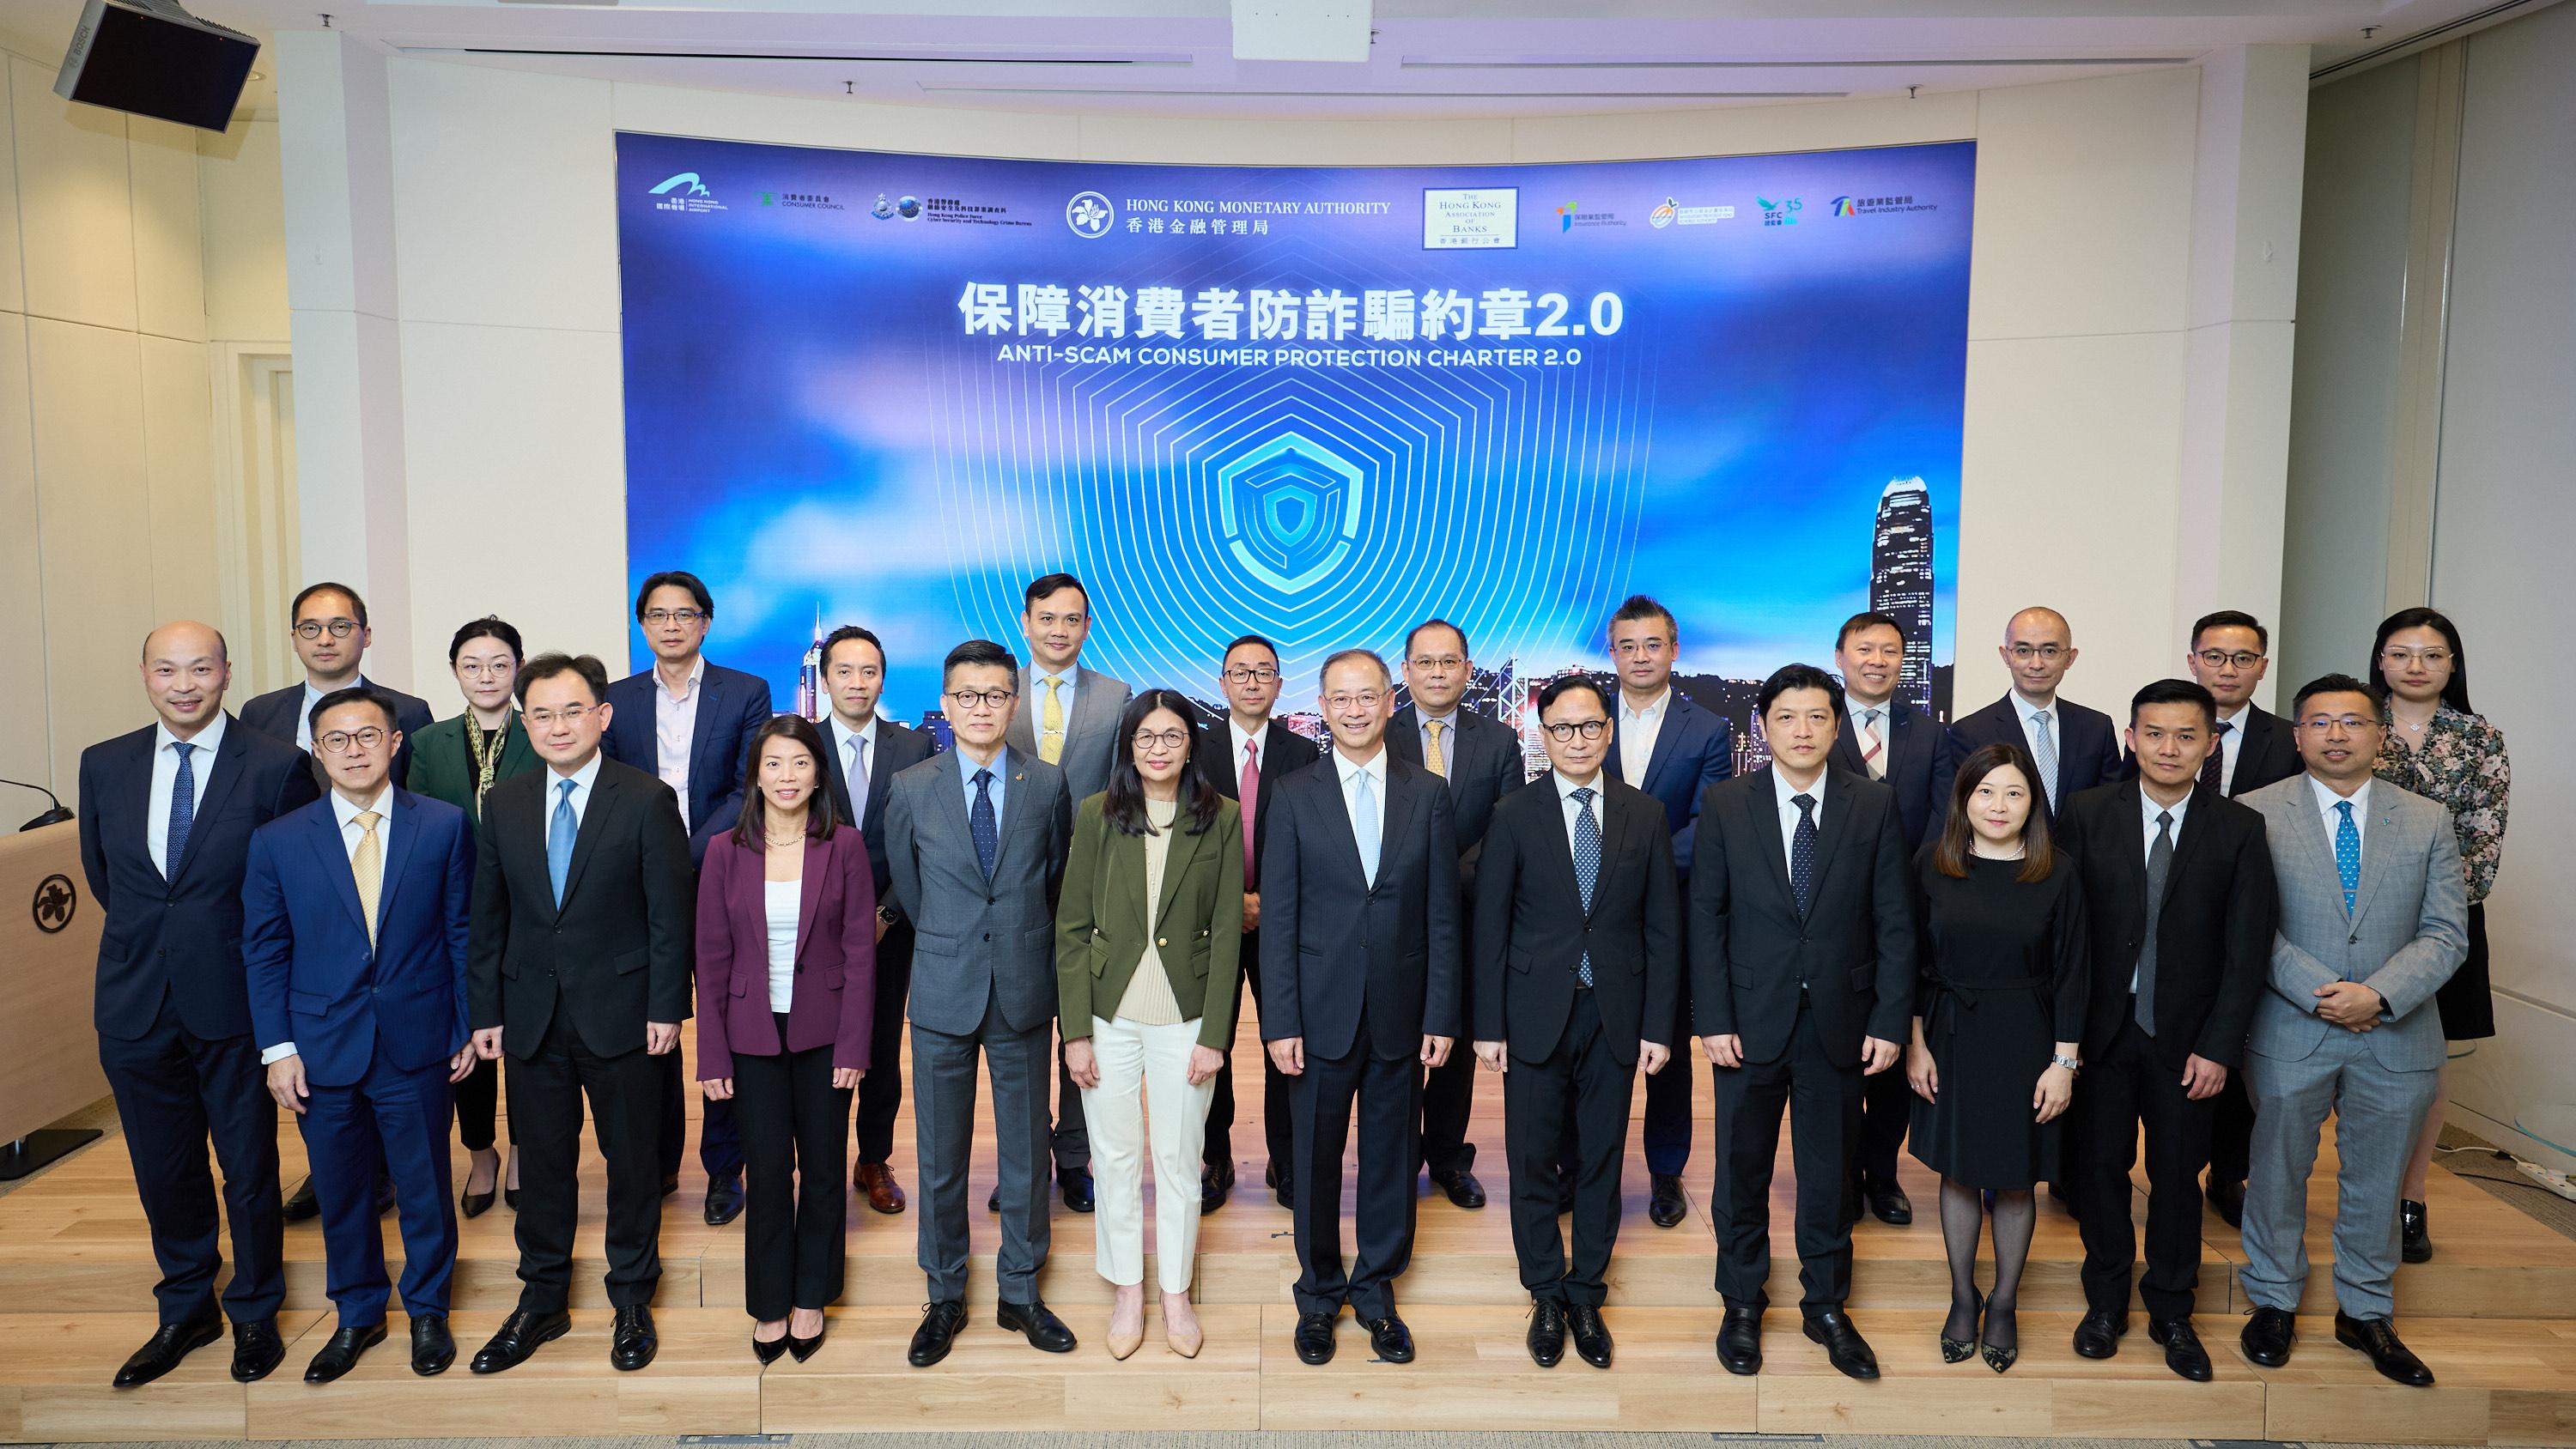 The Chief Executive of the Hong Kong Monetary Authority, Mr Eddie Yue (seventh left, front row); the Chief Executive Officer of the Insurance Authority, Mr Clement Cheung (eighth left, front row); the Managing Director of the Mandatory Provident Fund Schemes Authority, Mr Cheng Yan-chee (fifth left, front row); the Chief Executive Officer of the Securities and Futures Commission, Ms Julia Leung (sixth left, front row); and representatives of financial institutions attended the event to support the Anti-Scam Consumer Protection Charter 2.0.